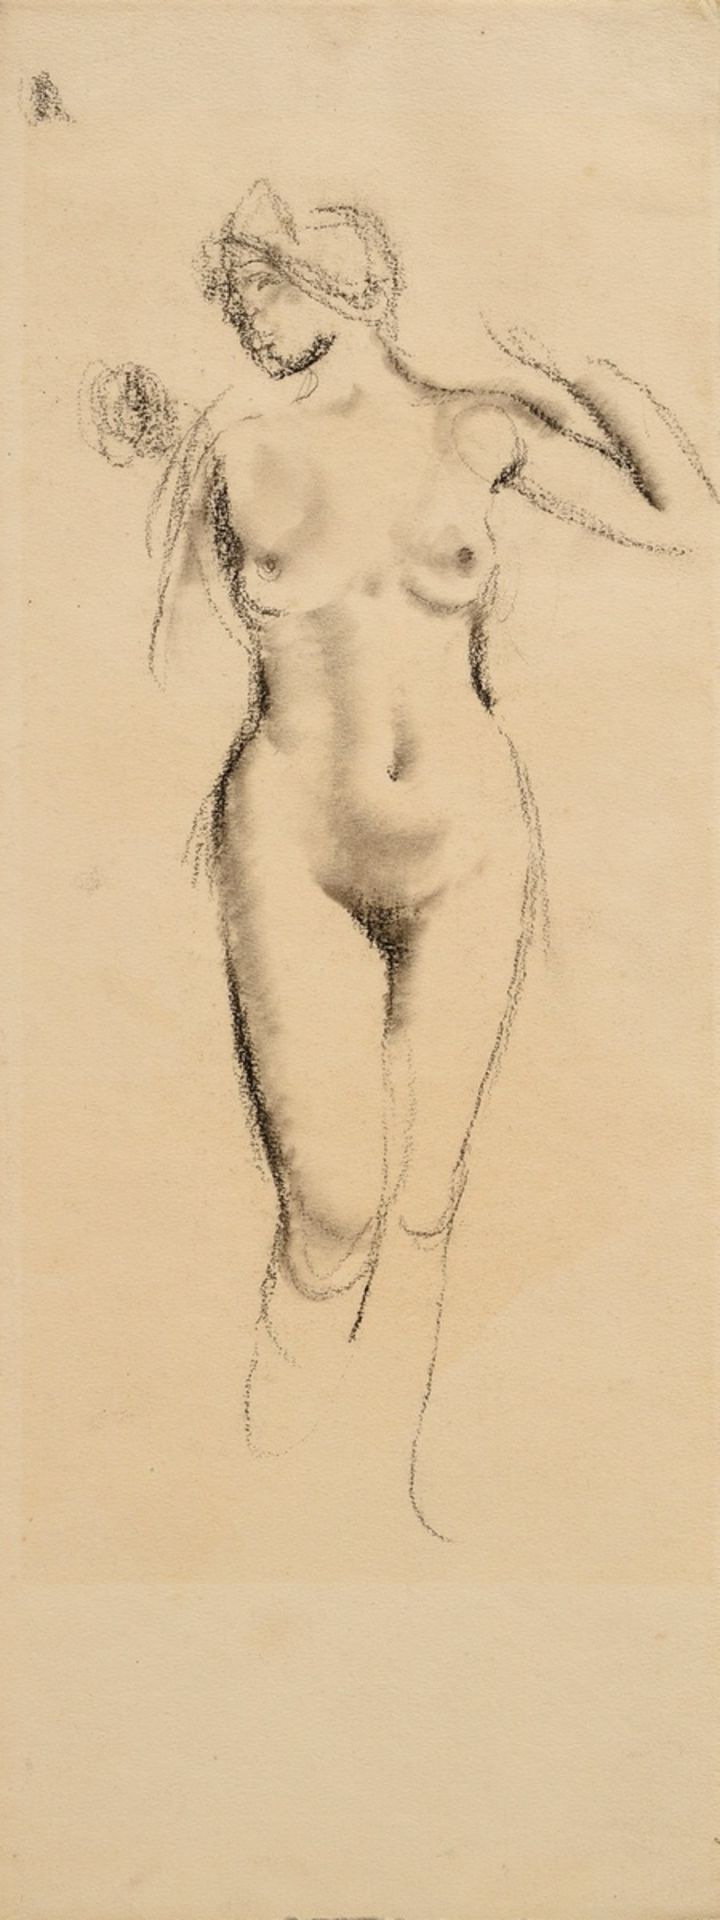 17 Mayershofer, Max (1875-1950) "Female nude drawings", charcoal, each sign., each mounted in passe - Image 14 of 19